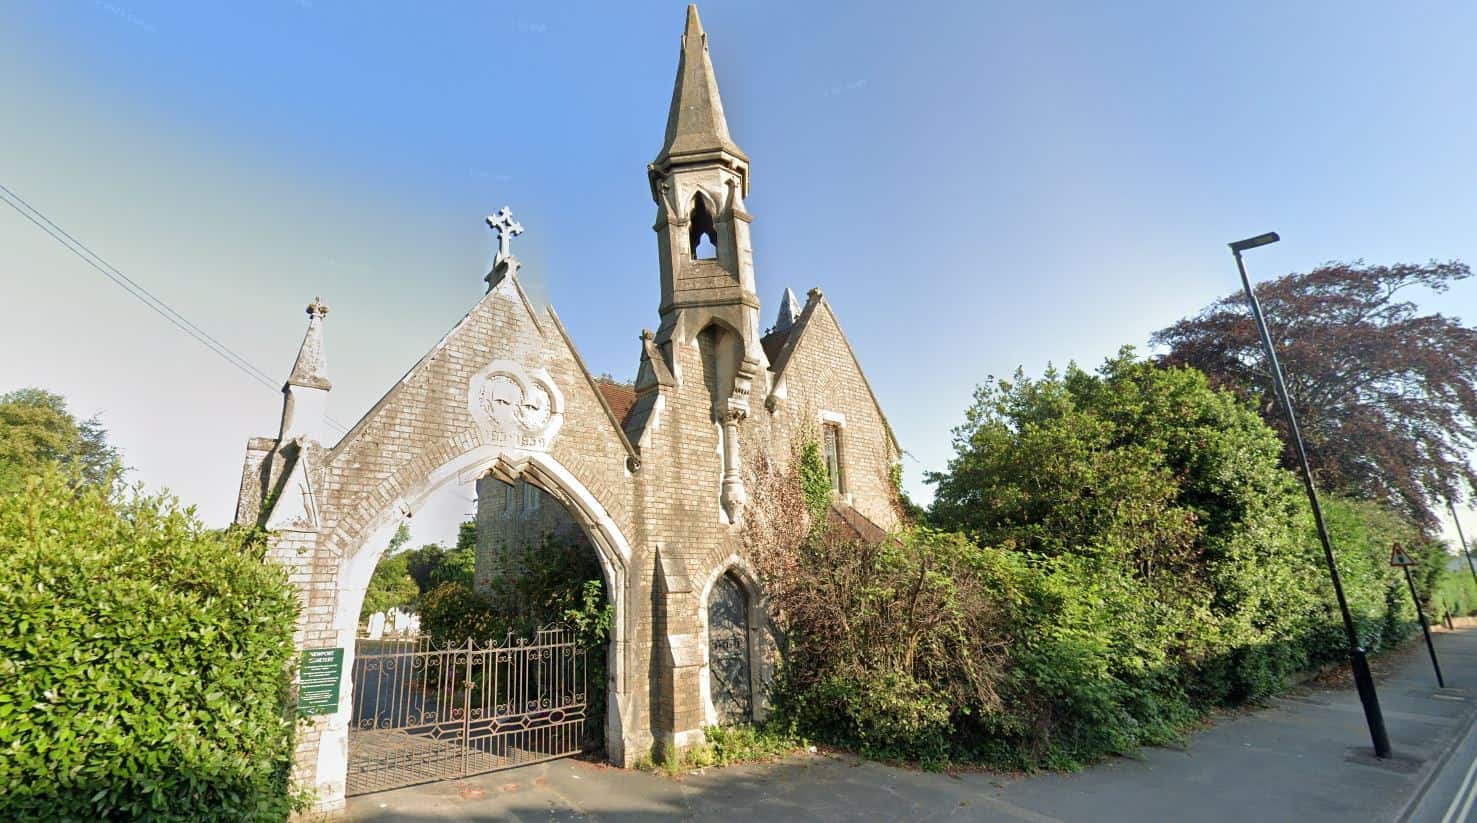 The entrance to Newport Cemetery - Google Maps